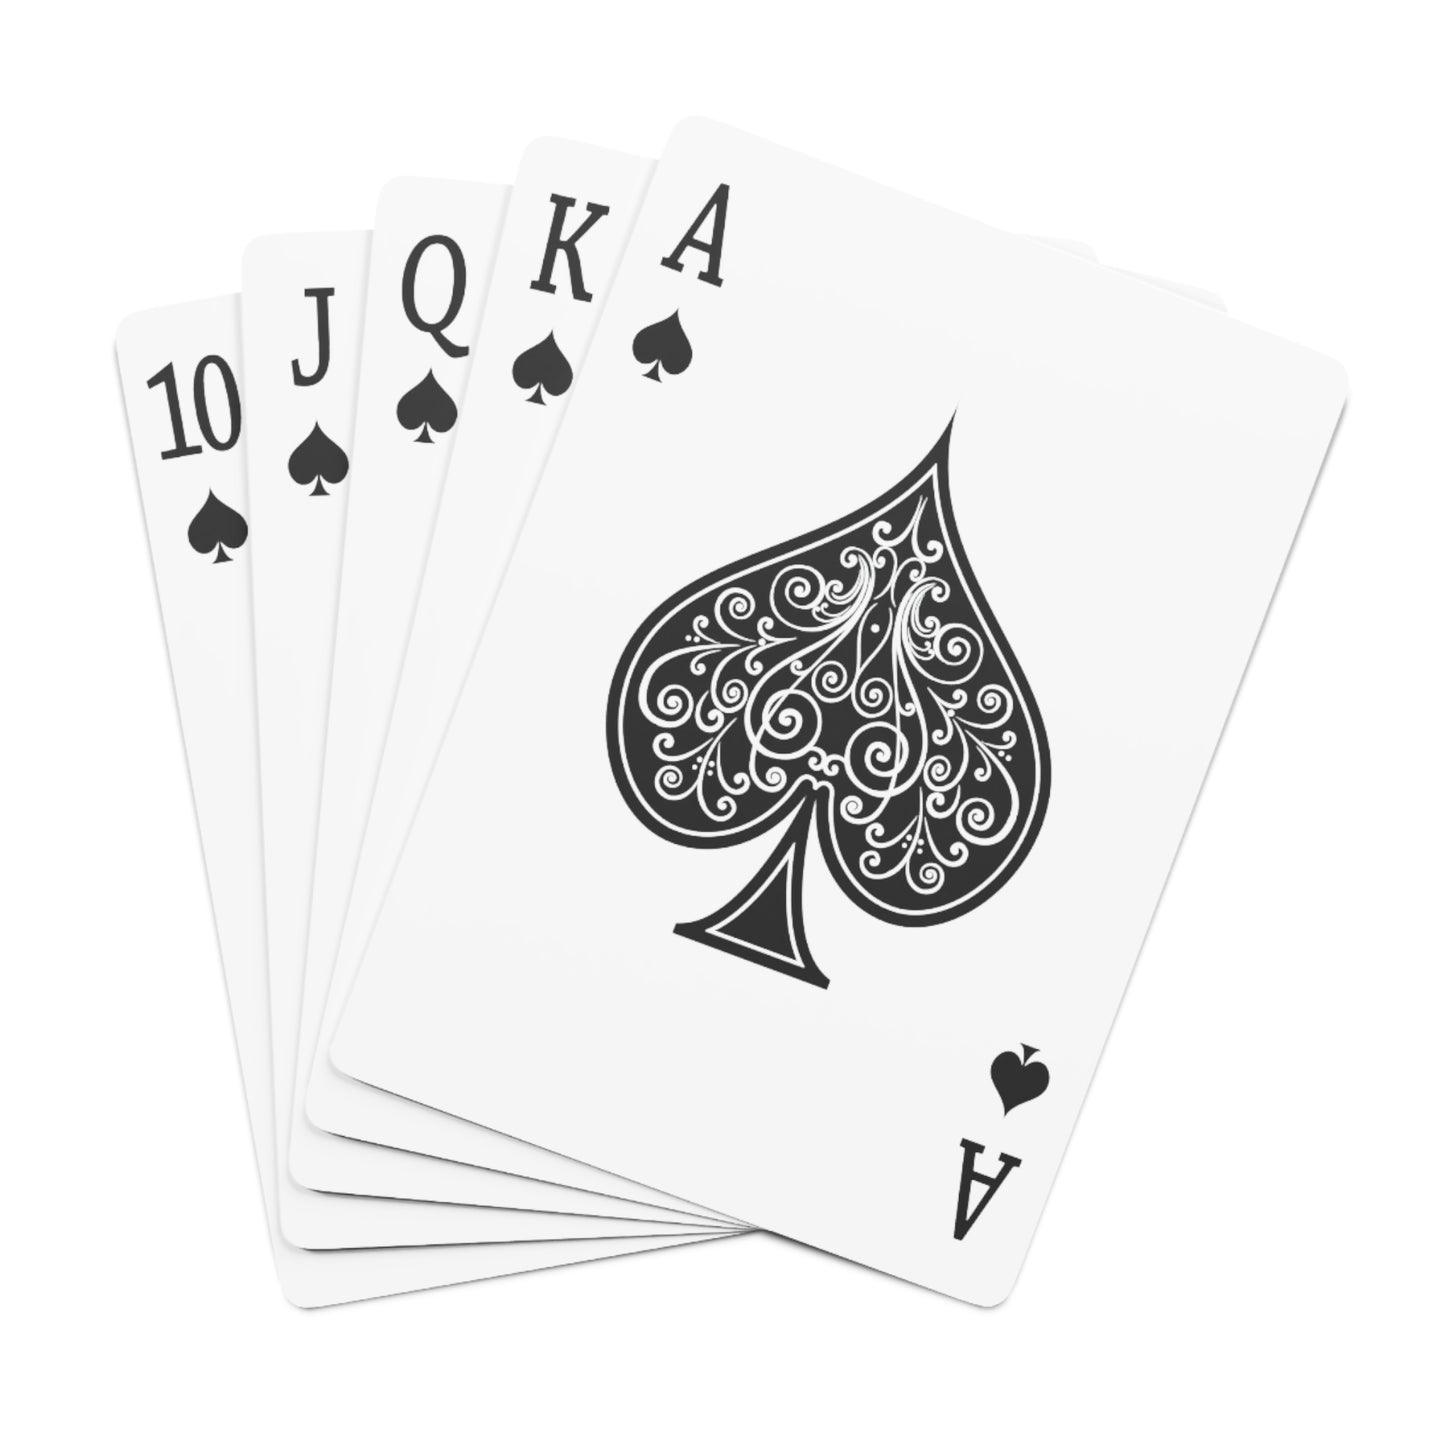 A Man's Face - Poker Cards